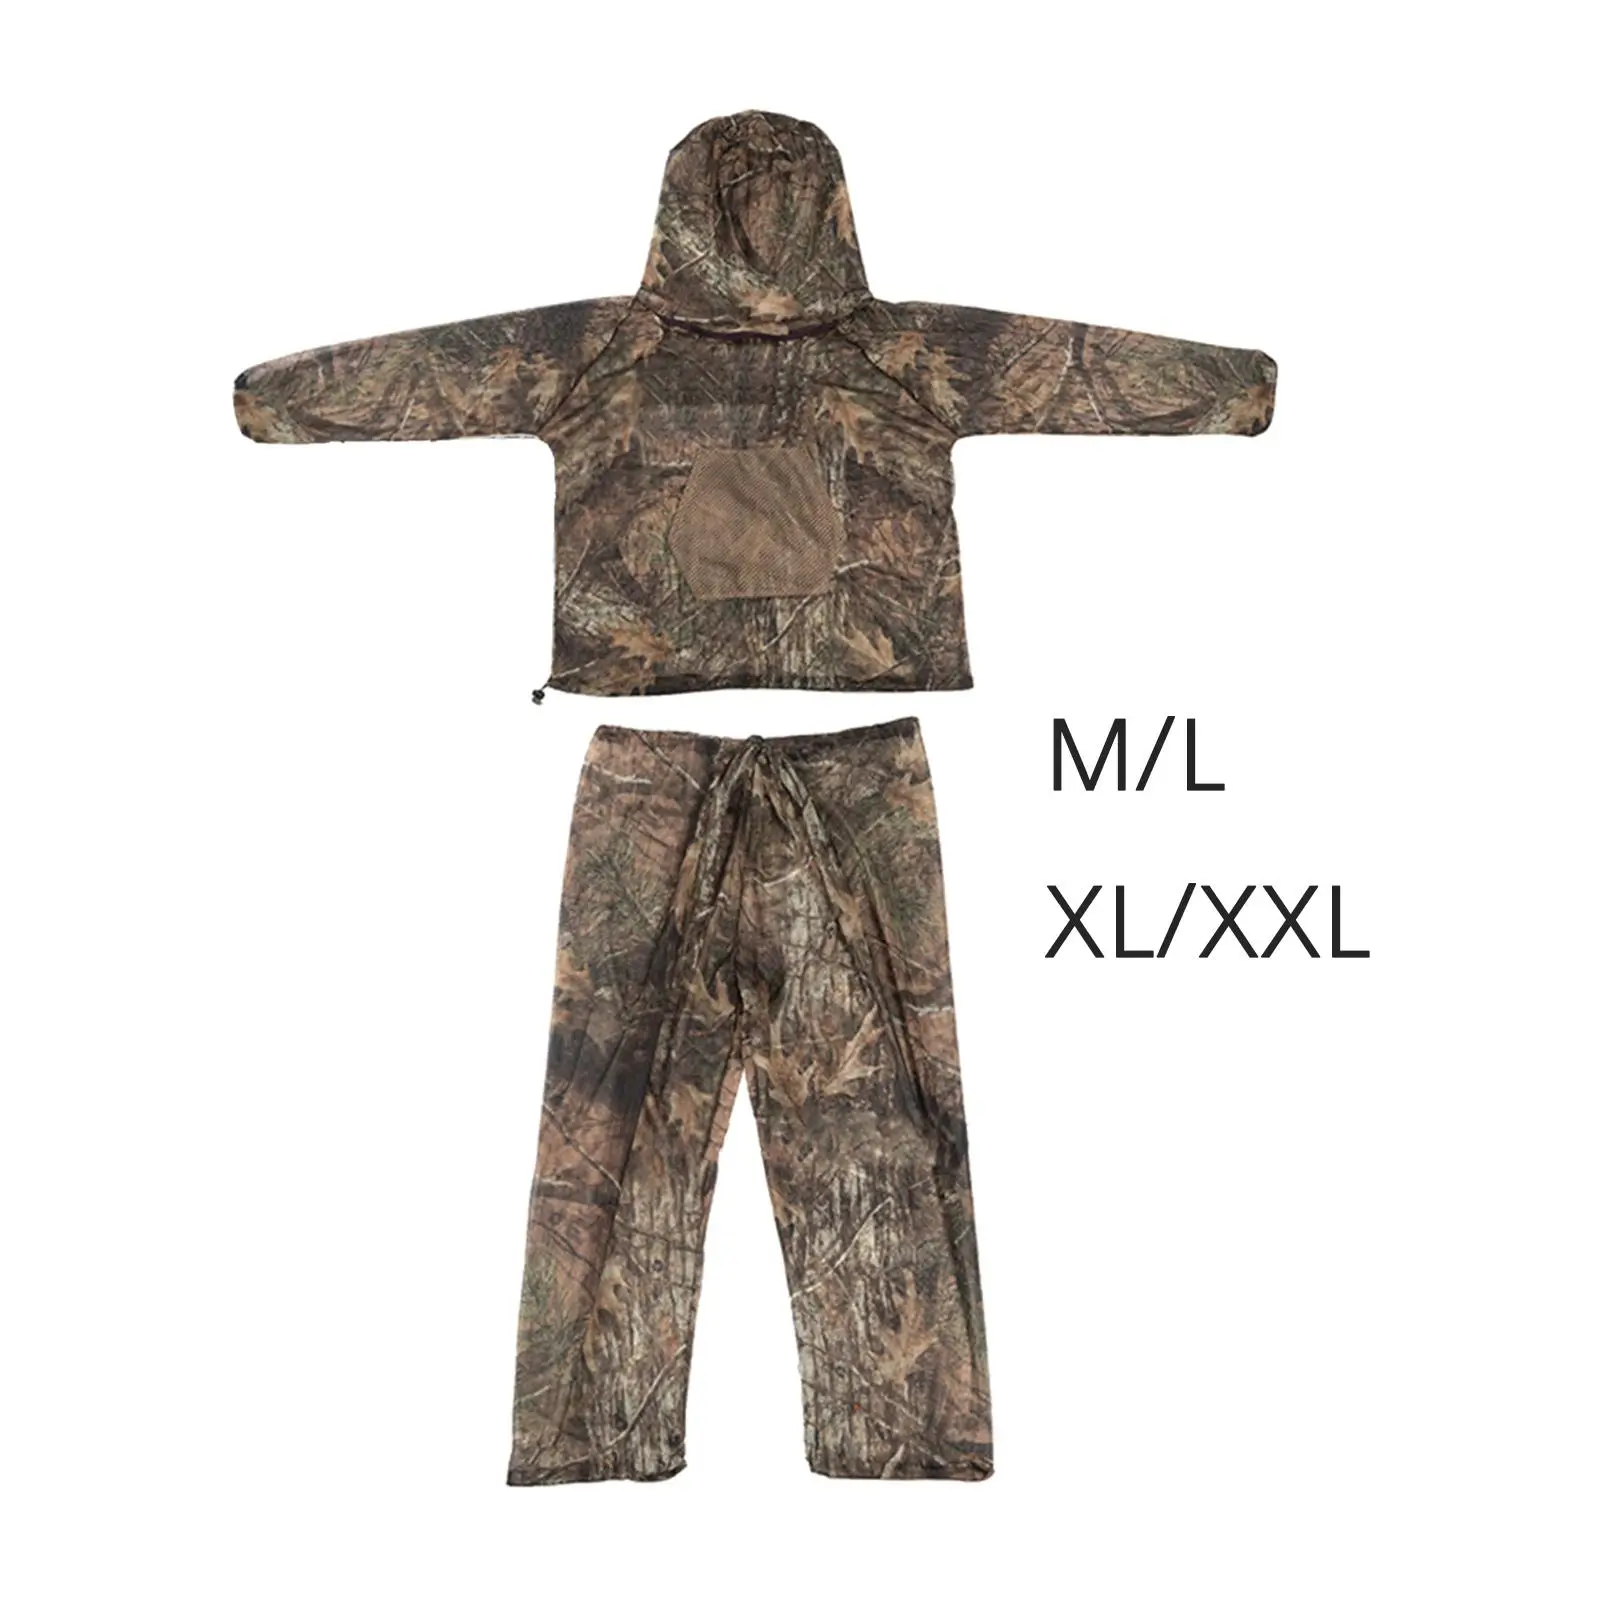 Mesh ed suits Lightweight Pants net Pants Jacket for Fishing Outdoor